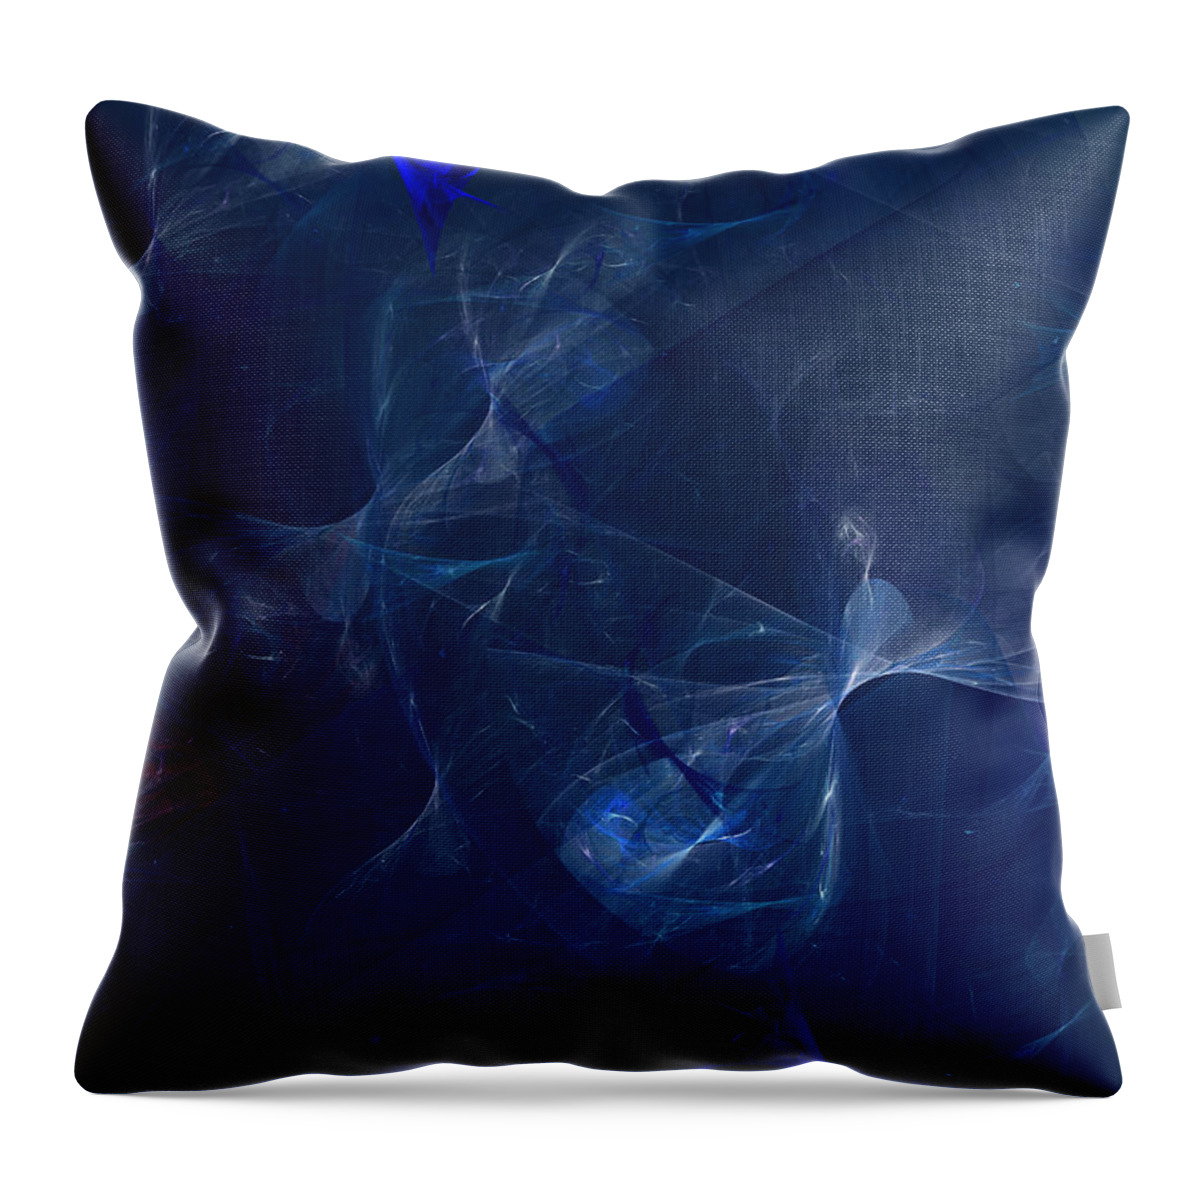 Abstract Throw Pillow featuring the digital art Subjective Character Of Experience by Jeff Iverson